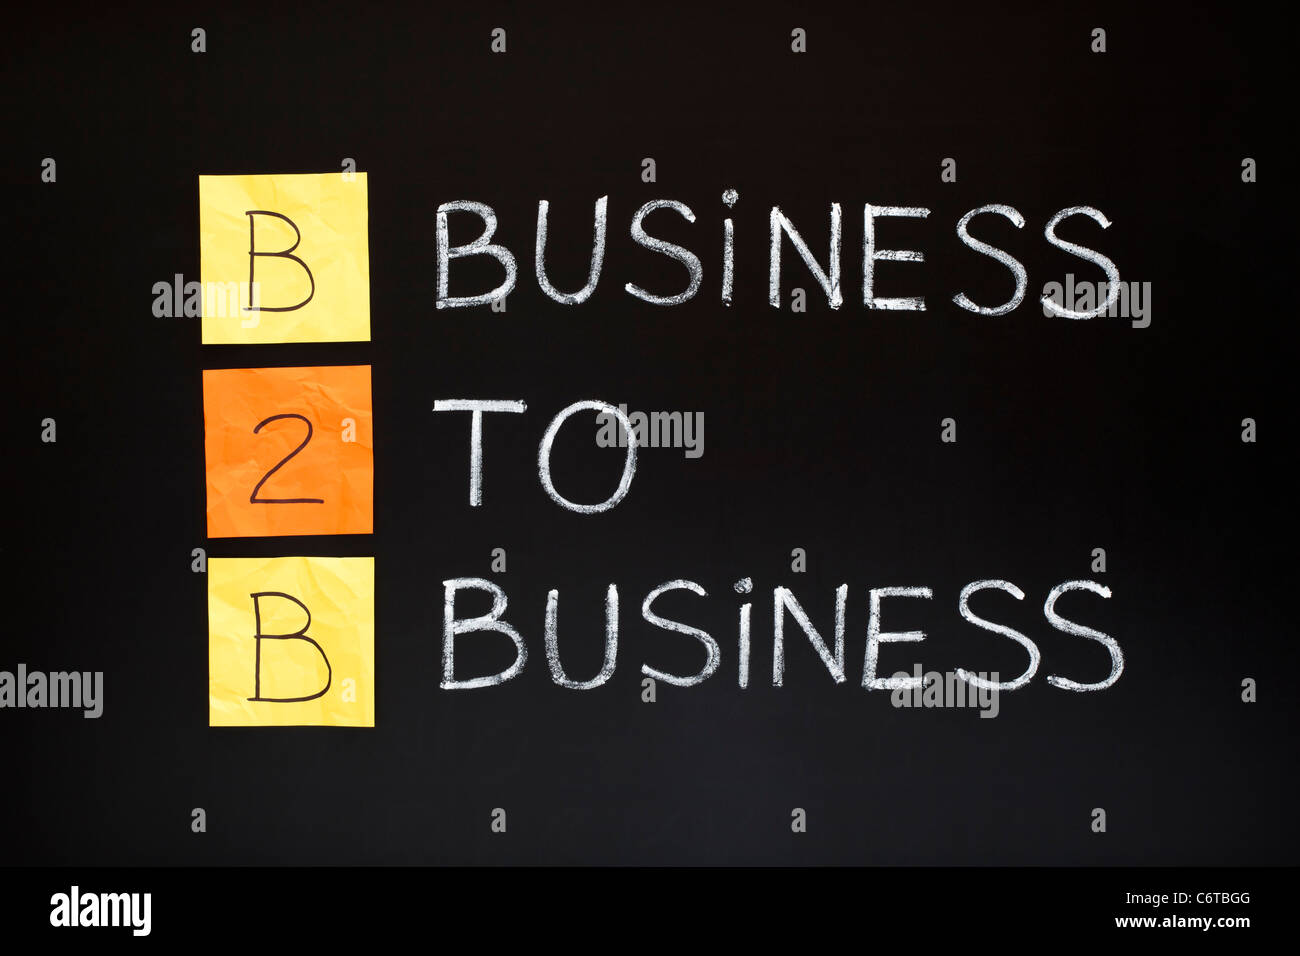 B2B acronym - BUSINESS TO BUSINESS. Concept made with sticky notes and white chalk on a blackboard. Stock Photo